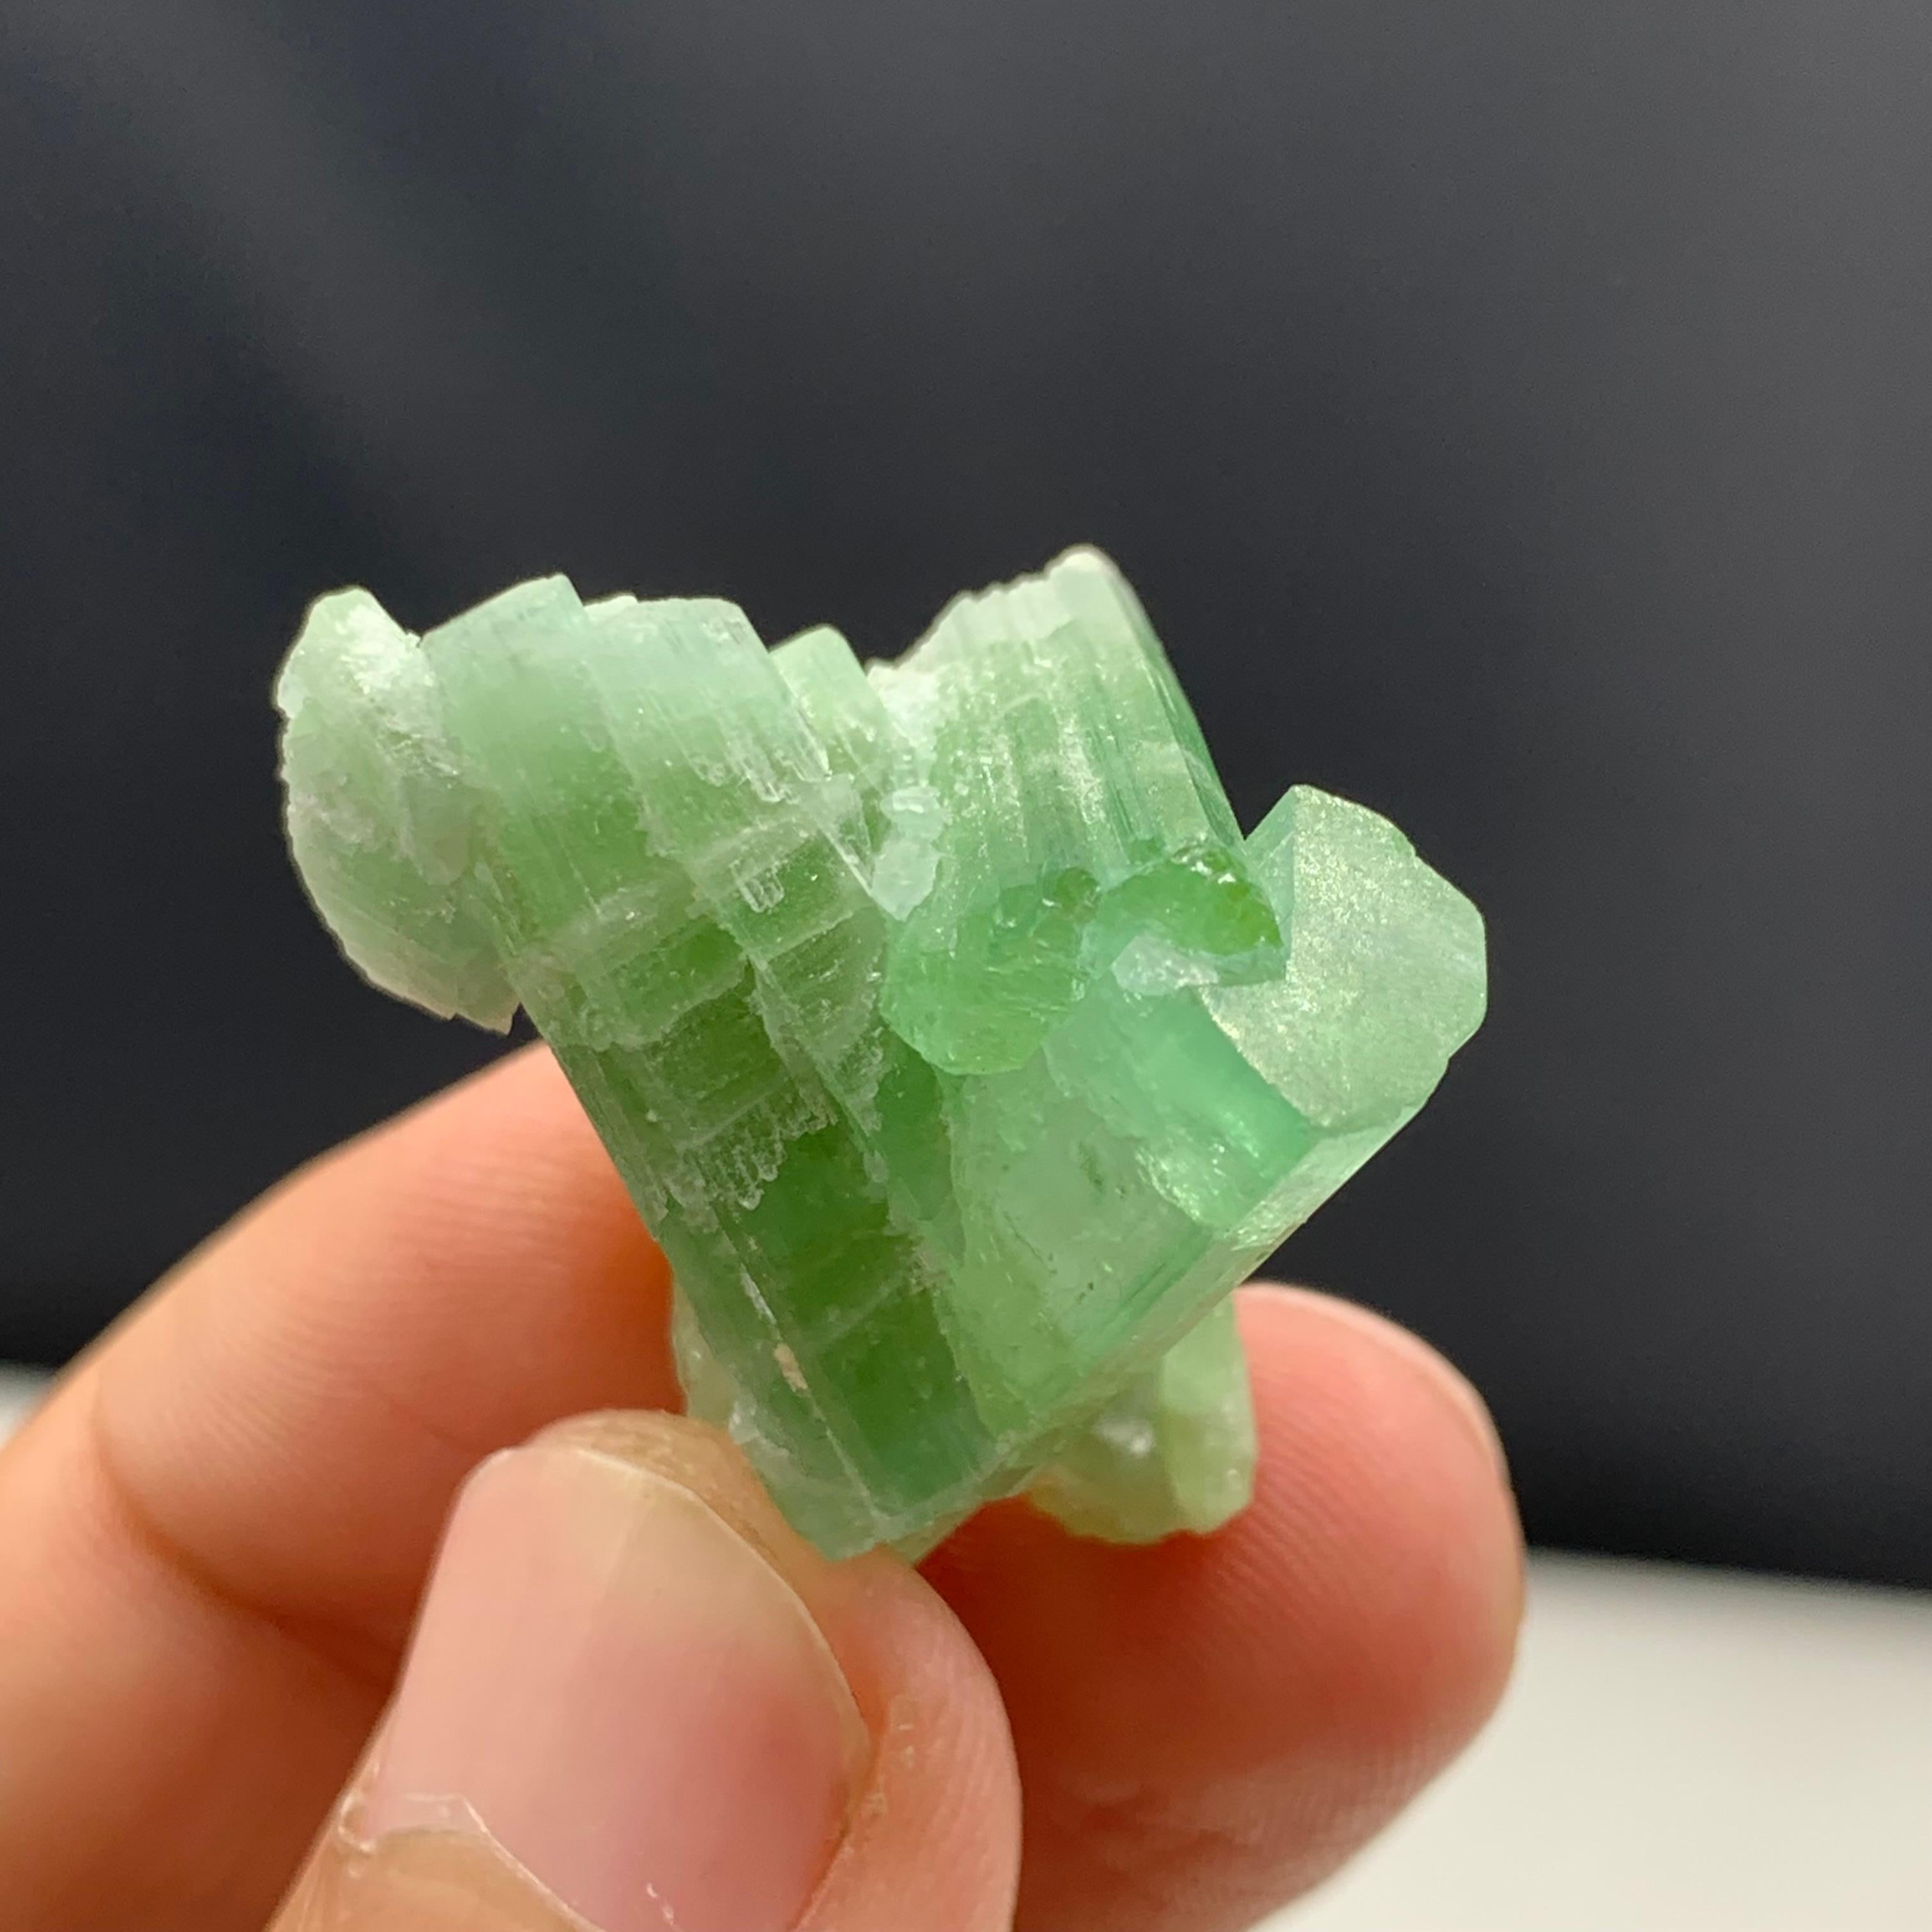 11.22 Gram Green Tourmaline Crystal Cluster From Kunar, Afghanistan 

Weight: 11.22 Gram
Dimension: 2.5 x 3.1 x 1.7 Cm
Origin: kunar, Afghanistan 

Tourmaline is a crystalline silicate mineral group in which boron is compounded with elements such as